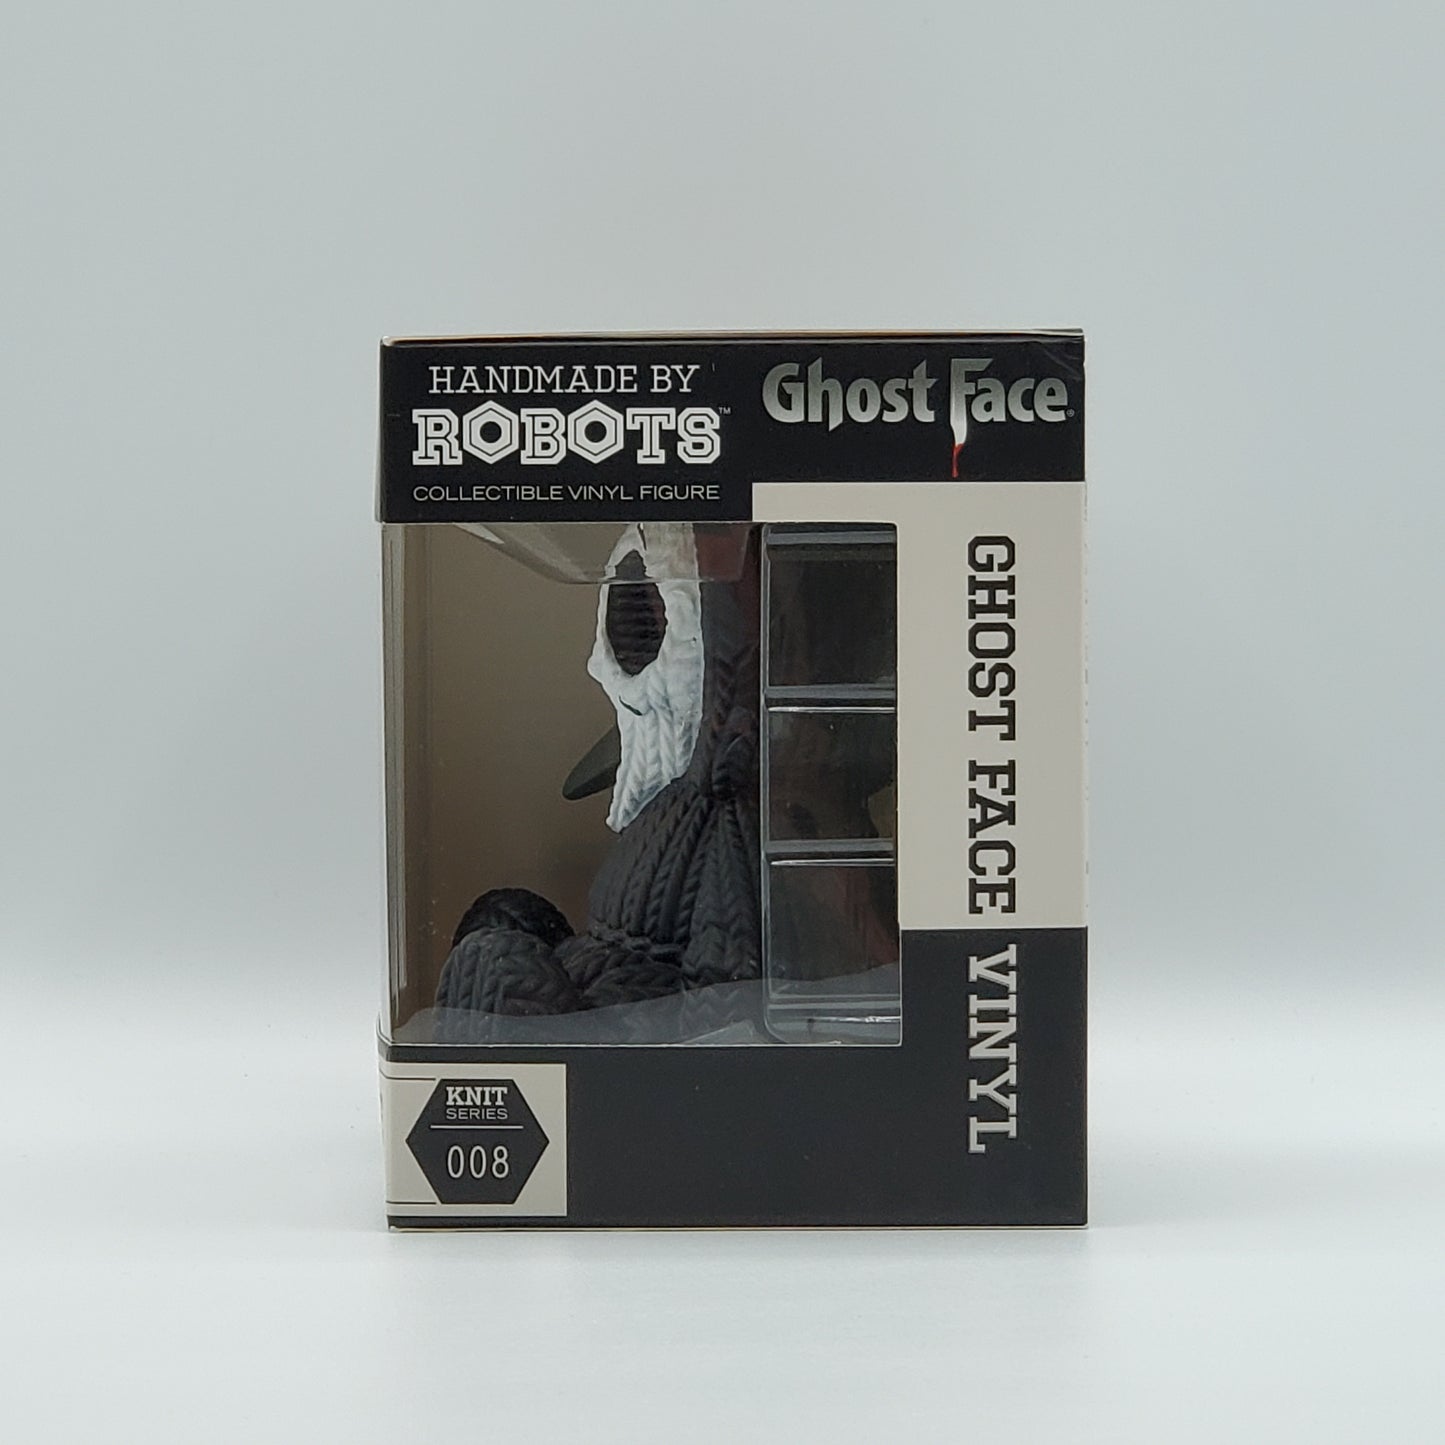 HANDMADE BY ROBOTS - GHOST FACE (WHITE)